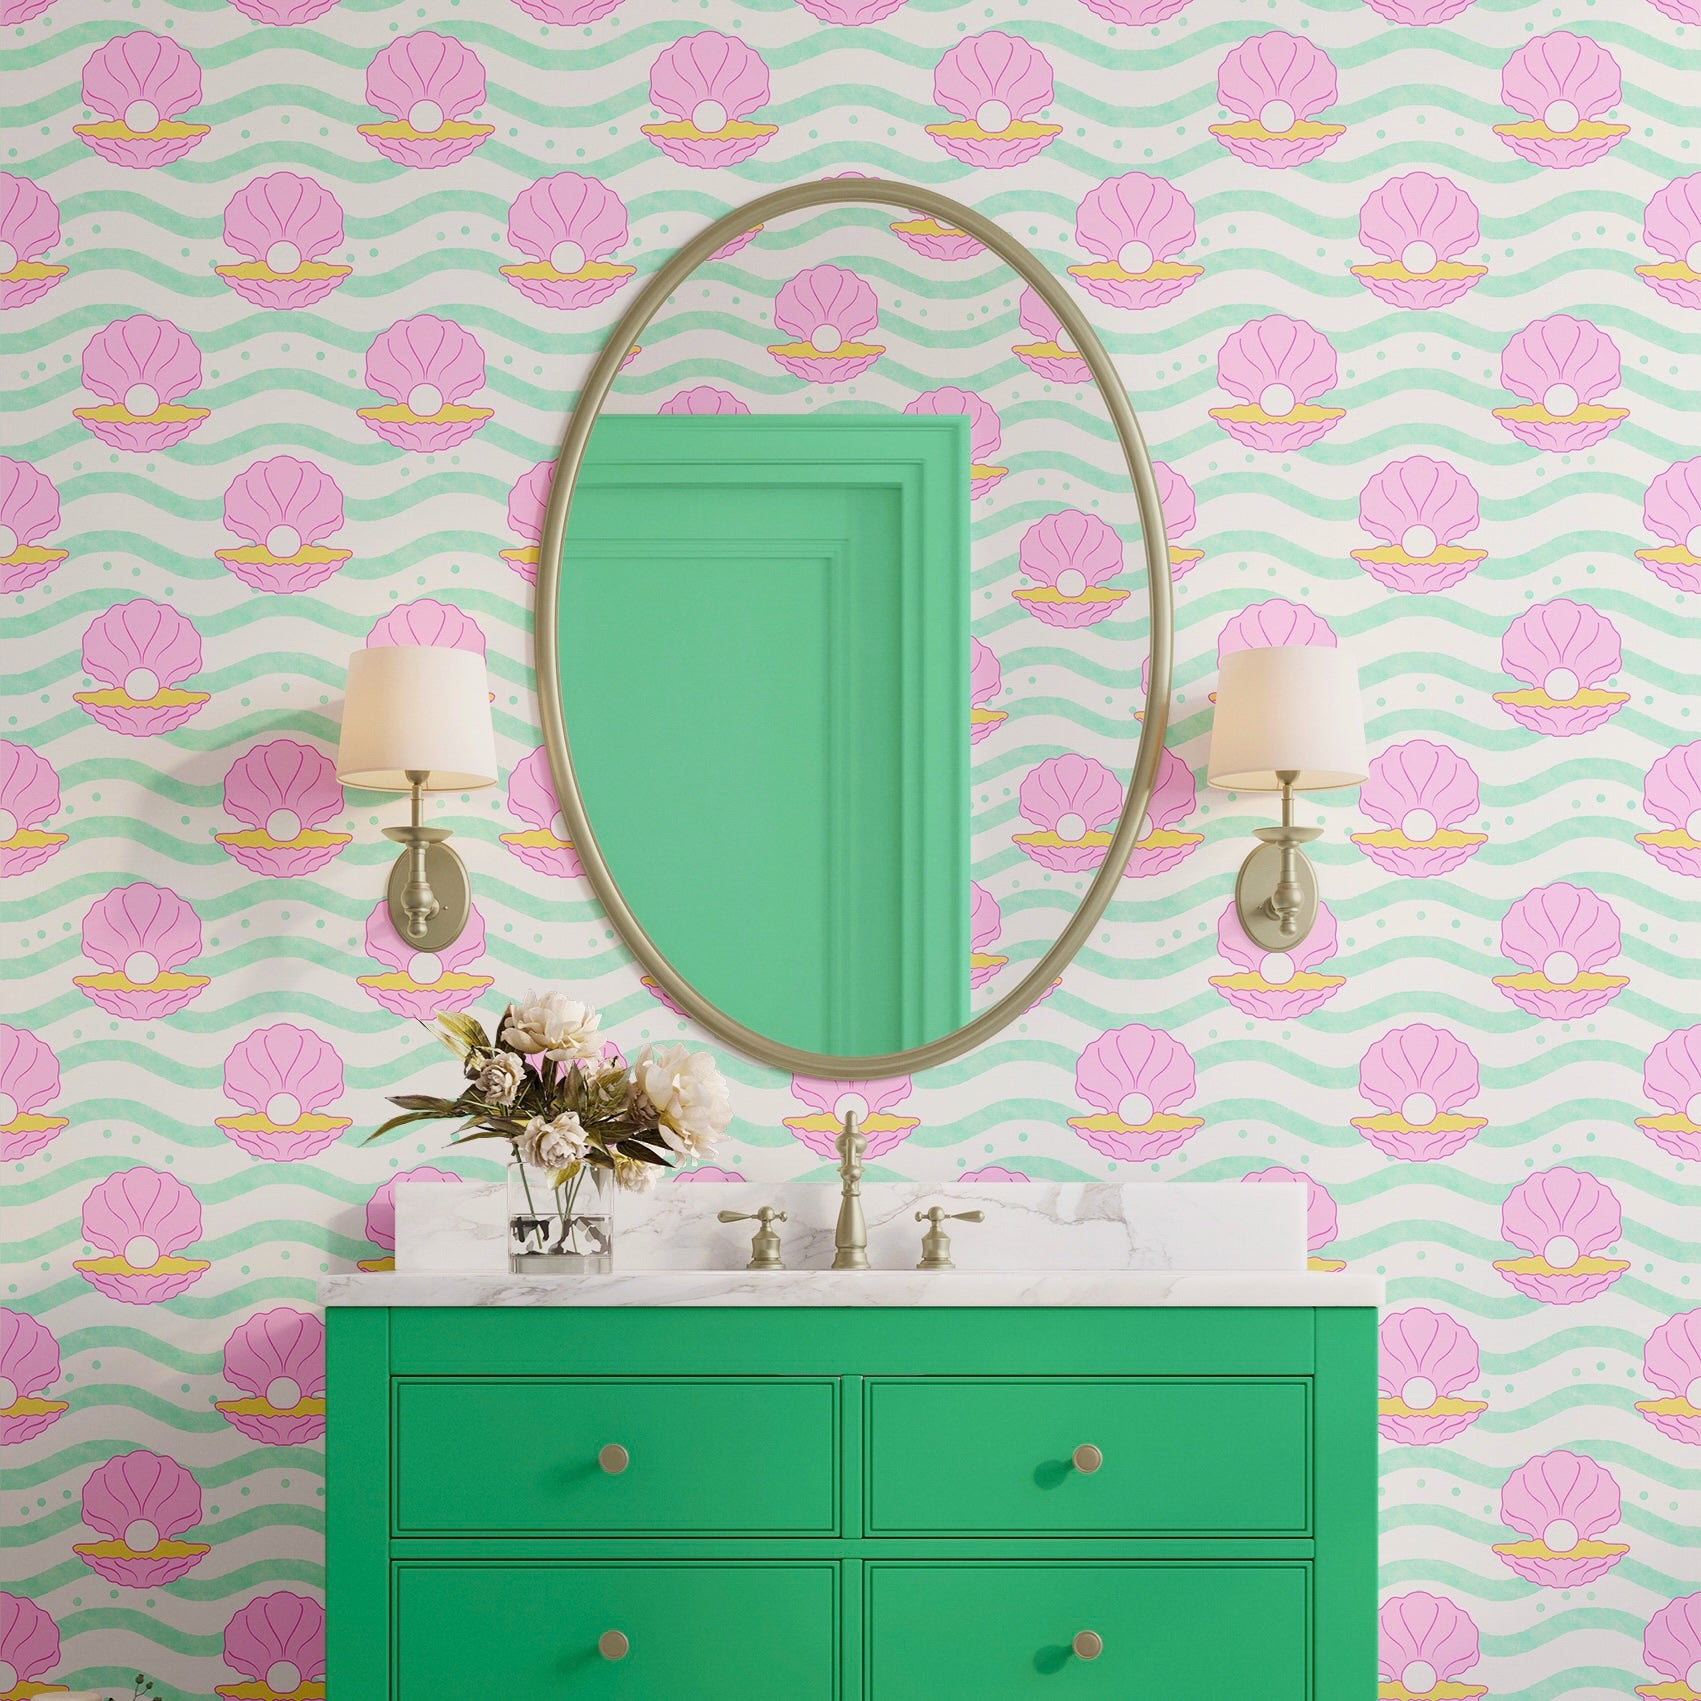 shell wallpaper in mint green and pink for bathrooms